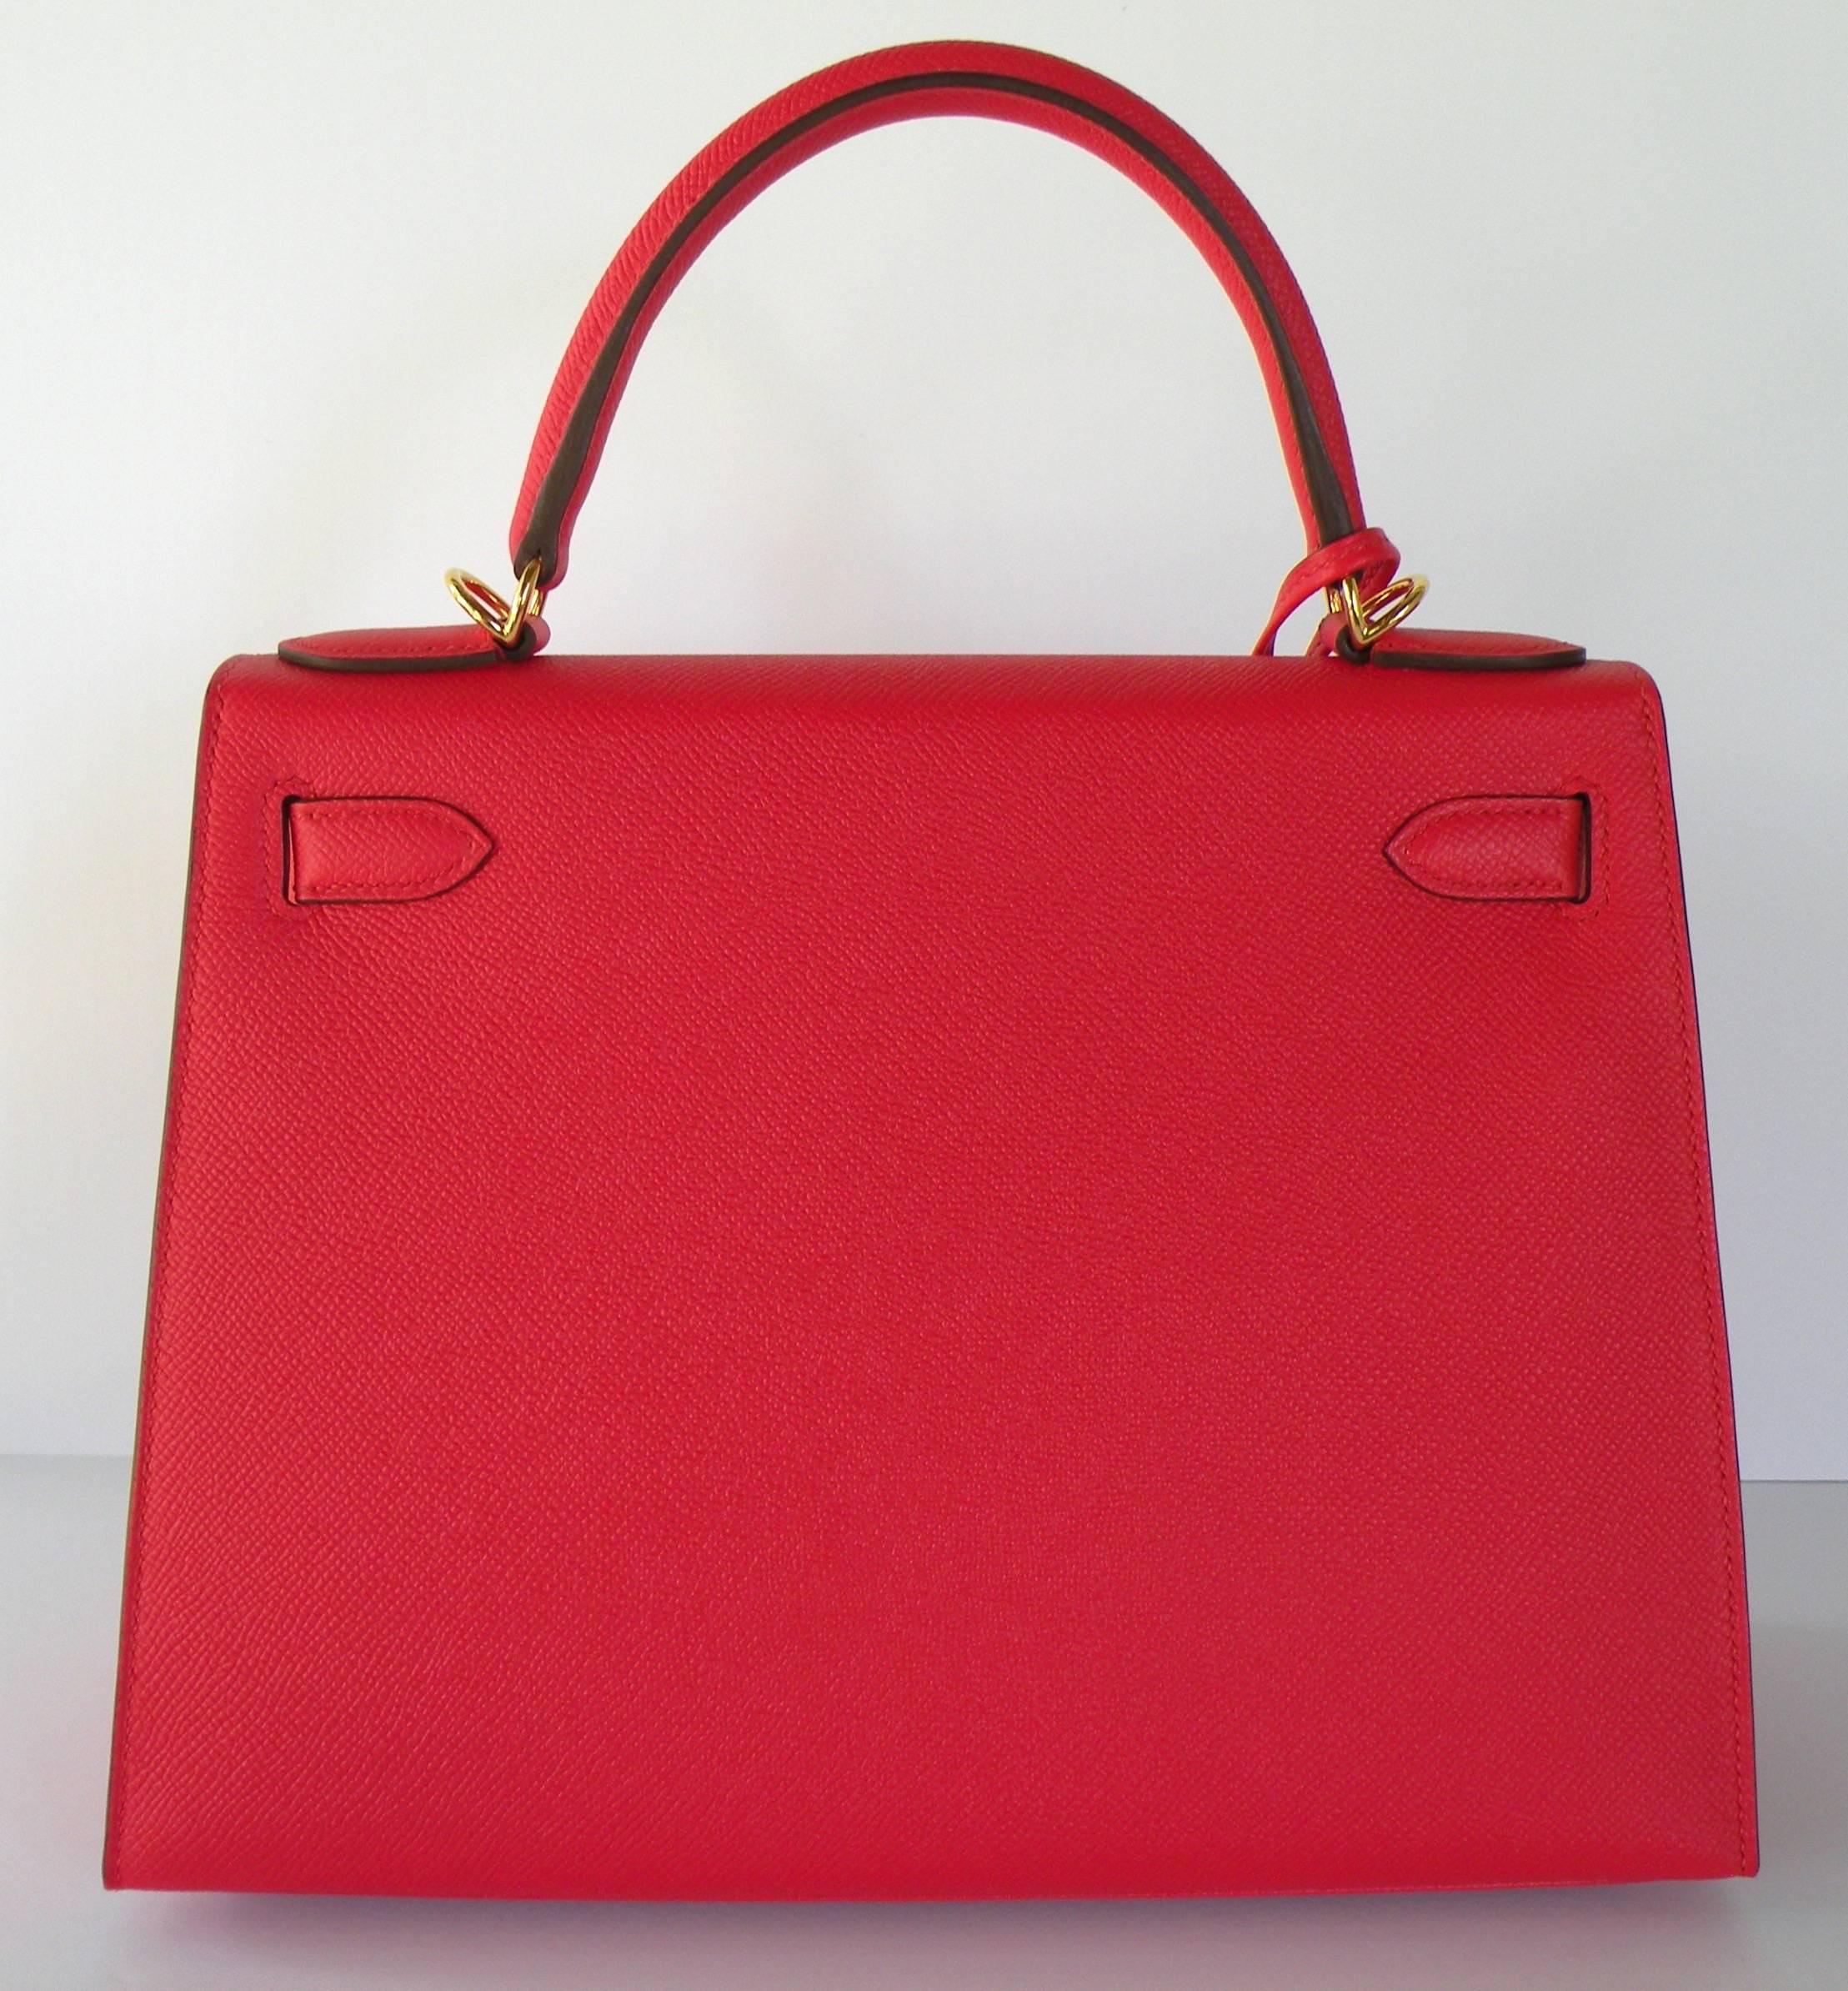 Hermes Rouge Tomate Sellier Kelly 28cm 
Epsom leather with gold hardware.
Sellier style which means stitching outside.
This color is a regal red. just stunning.
Tonal Stitching
Toggle Closure
Removable shoulder strap
Lock and Keys
Clochette


The